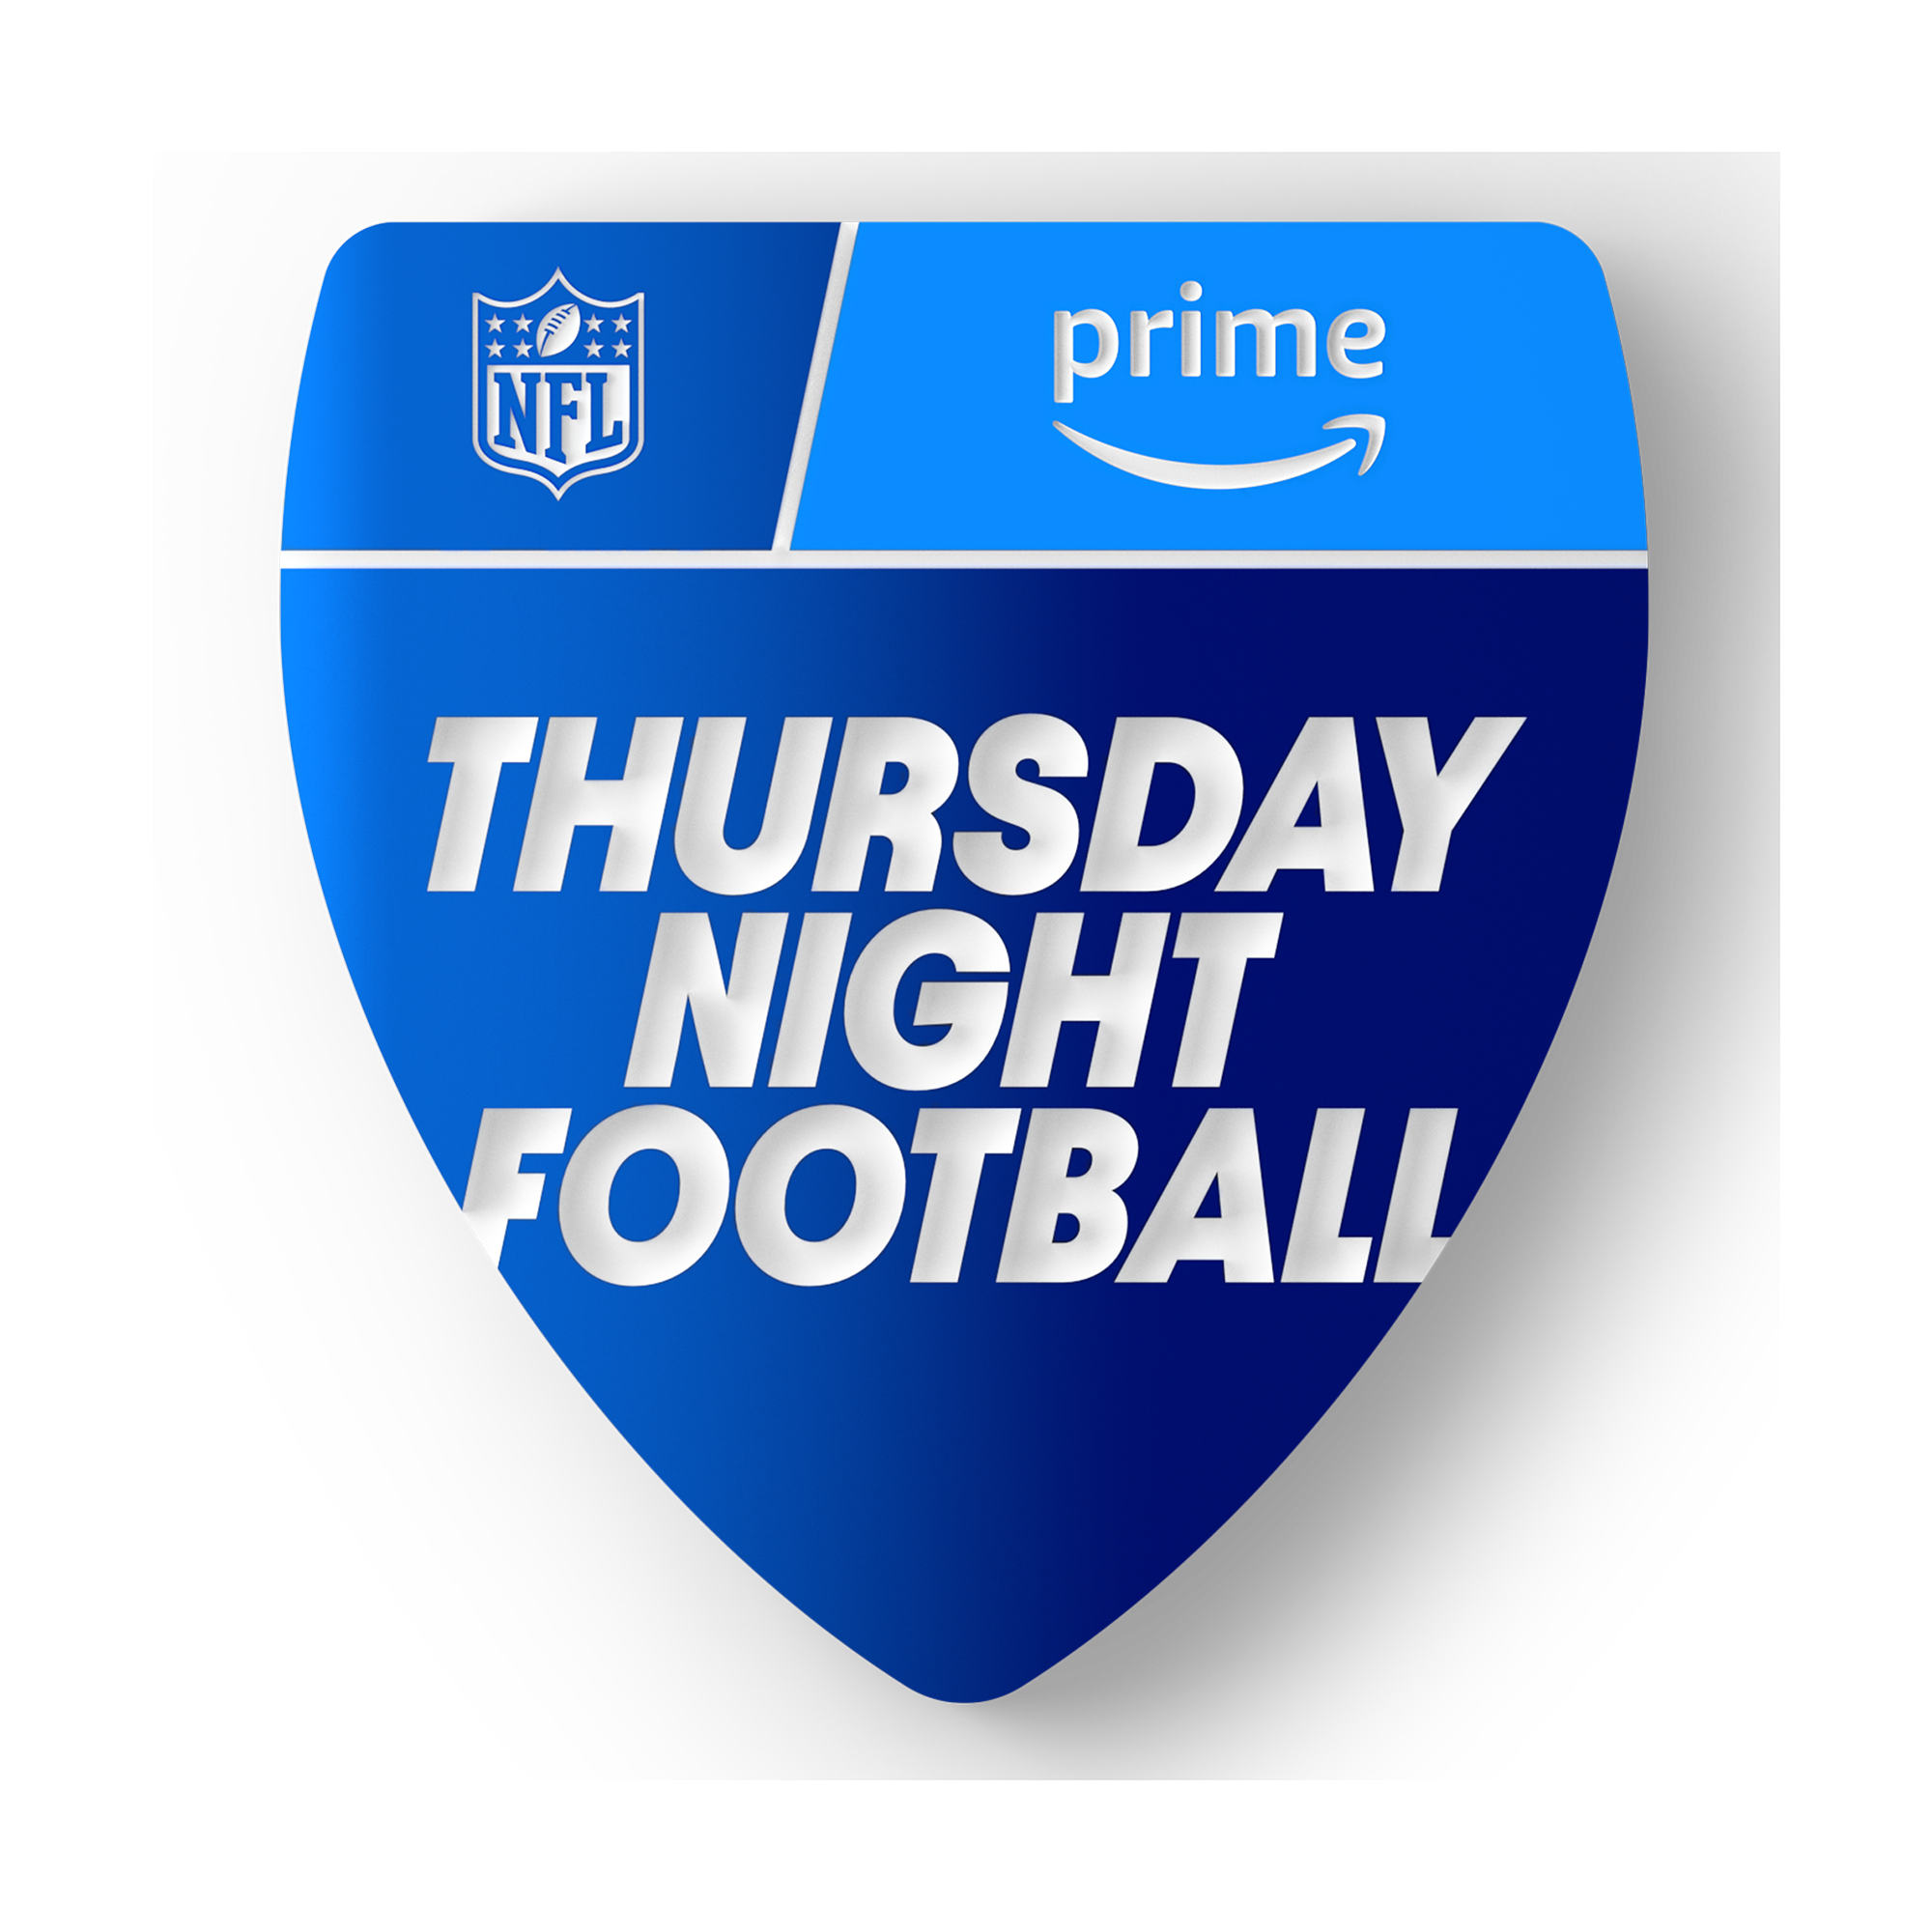 who is playing football tonight thursday night